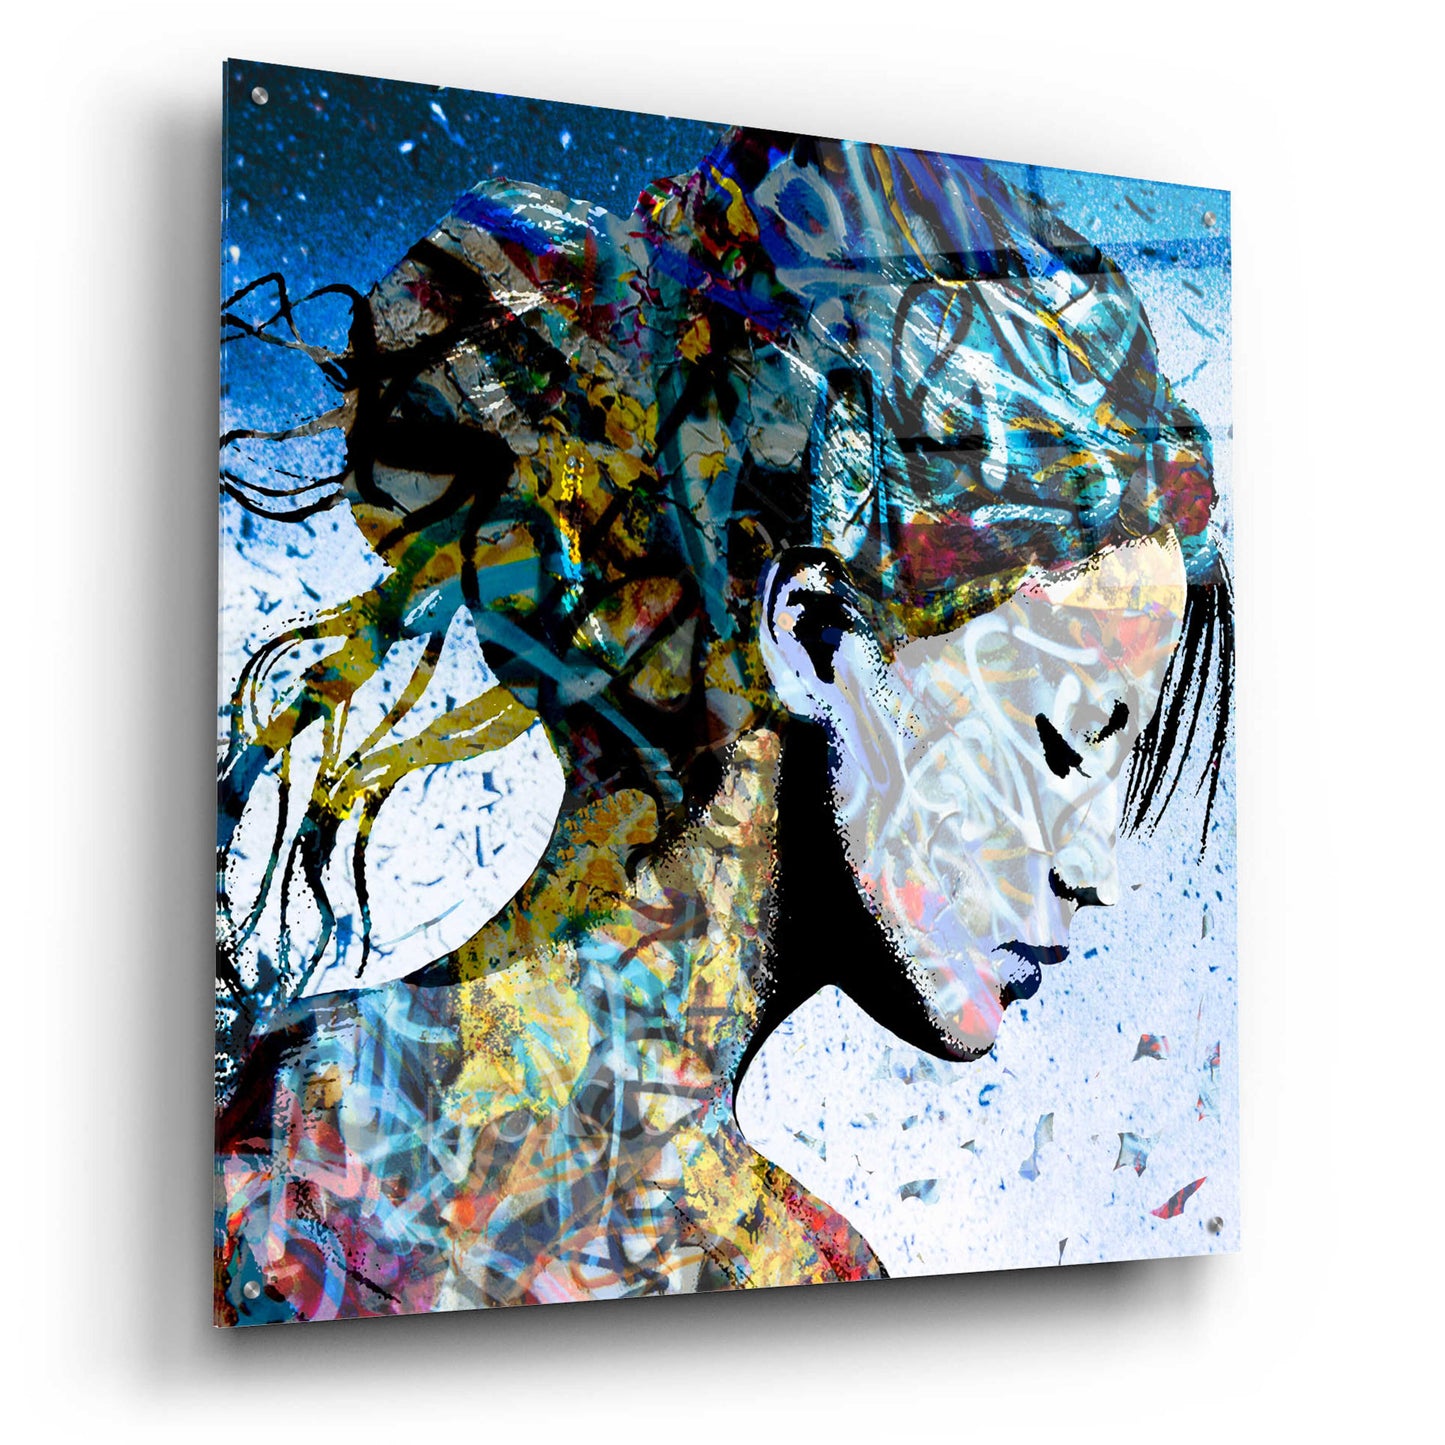 Epic Art 'THE MODEST GIRL' by DB Waterman,36x36